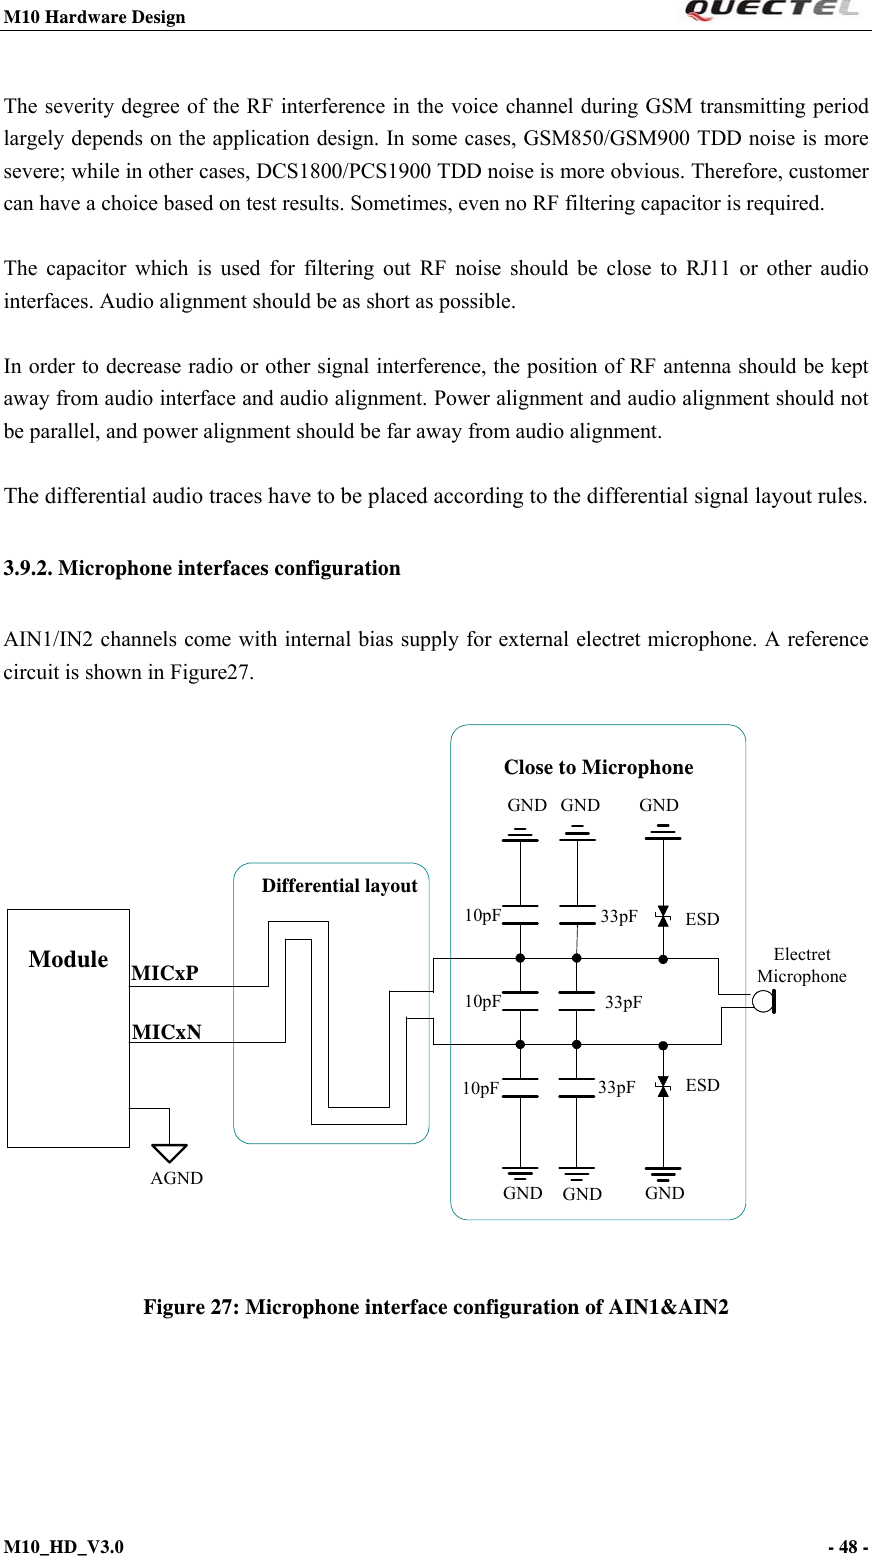 M10 Hardware Design                                                                 M10_HD_V3.0                                                                      - 48 -   The severity degree of the RF interference in the voice channel during GSM transmitting period largely depends on the application design. In some cases, GSM850/GSM900 TDD noise is more severe; while in other cases, DCS1800/PCS1900 TDD noise is more obvious. Therefore, customer can have a choice based on test results. Sometimes, even no RF filtering capacitor is required.  The capacitor which is used for filtering out RF noise should be close to RJ11 or other audio interfaces. Audio alignment should be as short as possible.  In order to decrease radio or other signal interference, the position of RF antenna should be kept away from audio interface and audio alignment. Power alignment and audio alignment should not be parallel, and power alignment should be far away from audio alignment.  The differential audio traces have to be placed according to the differential signal layout rules.   3.9.2. Microphone interfaces configuration AIN1/IN2 channels come with internal bias supply for external electret microphone. A reference circuit is shown in Figure27. 10pF 33pF33pF33pFClose to MicrophoneMICxPMICxNGNDGNDDifferential layoutModule Electret MicrophoneGNDGND10pF10pFGNDGNDESD ESDAGND Figure 27: Microphone interface configuration of AIN1&amp;AIN2 